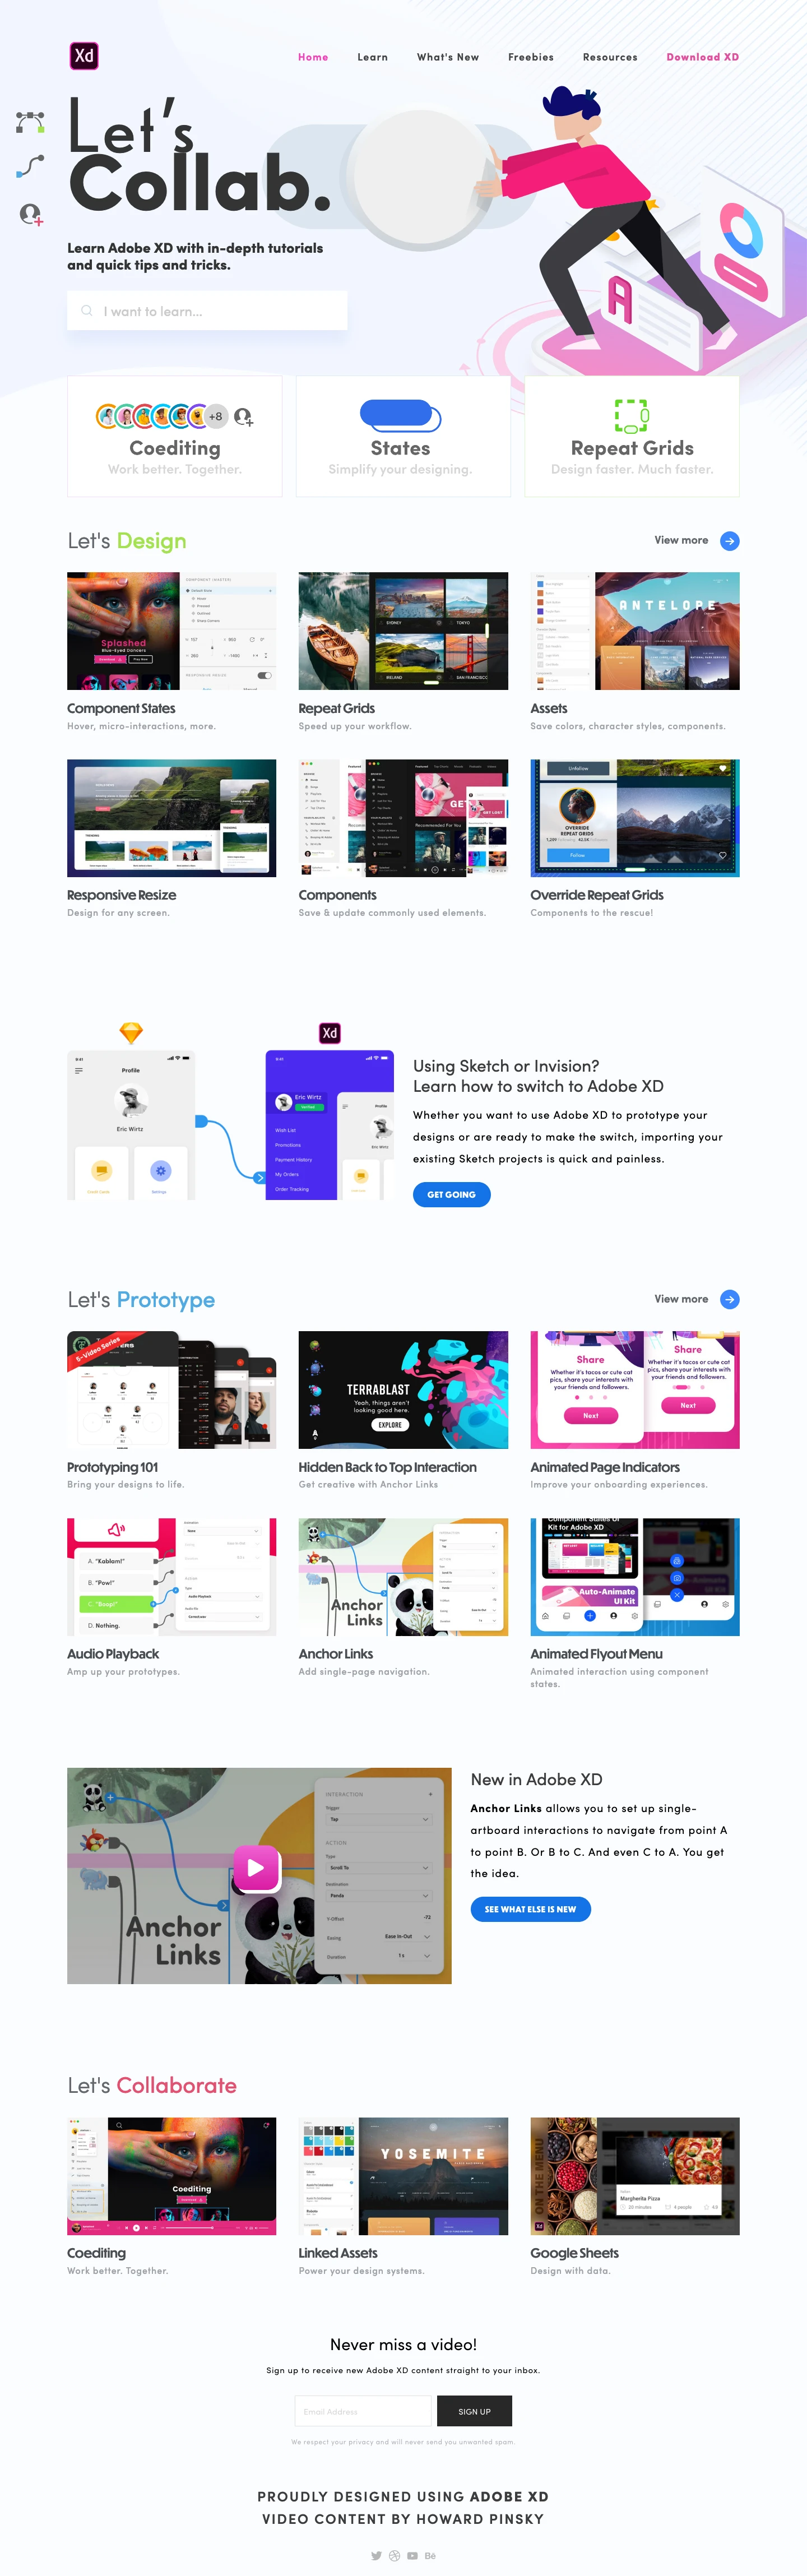 Let's XD Landing Page Example: Learn Adobe XD with Adobe XD Evangelist Howard Pinsky and master the UI/UX tools for UI design and prototyping. Watch Adobe XD videos, tutorials, quick tips, and more.